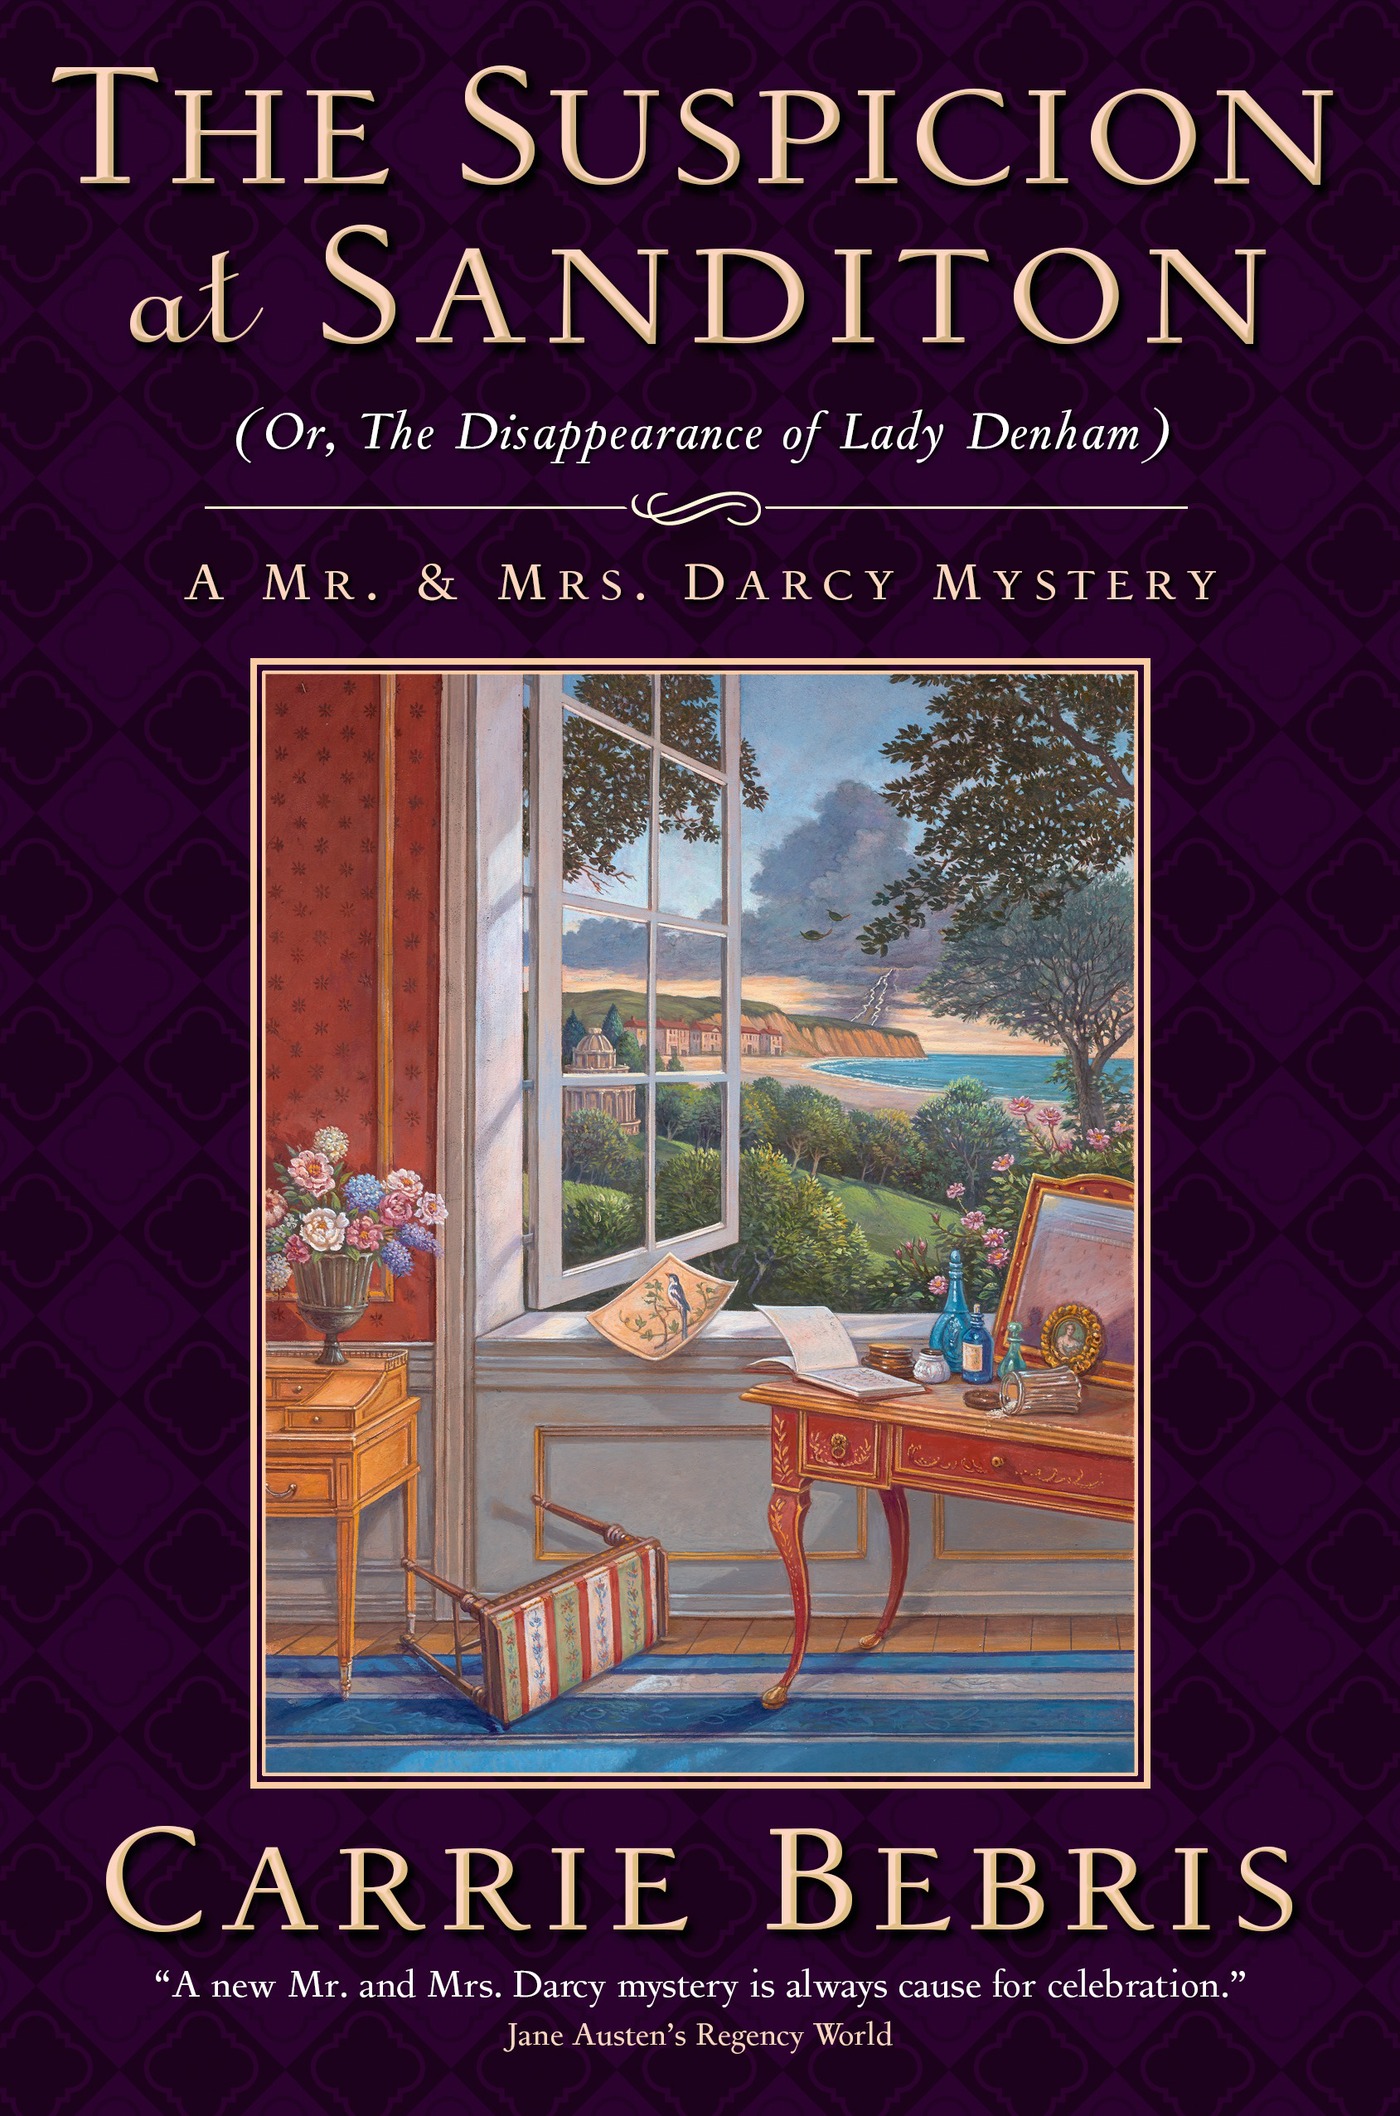 The Suspicion at Sanditon (Or, The Disappearance of Lady Denham) : A Mr. and Mrs. Darcy Mystery by Carrie Bebris